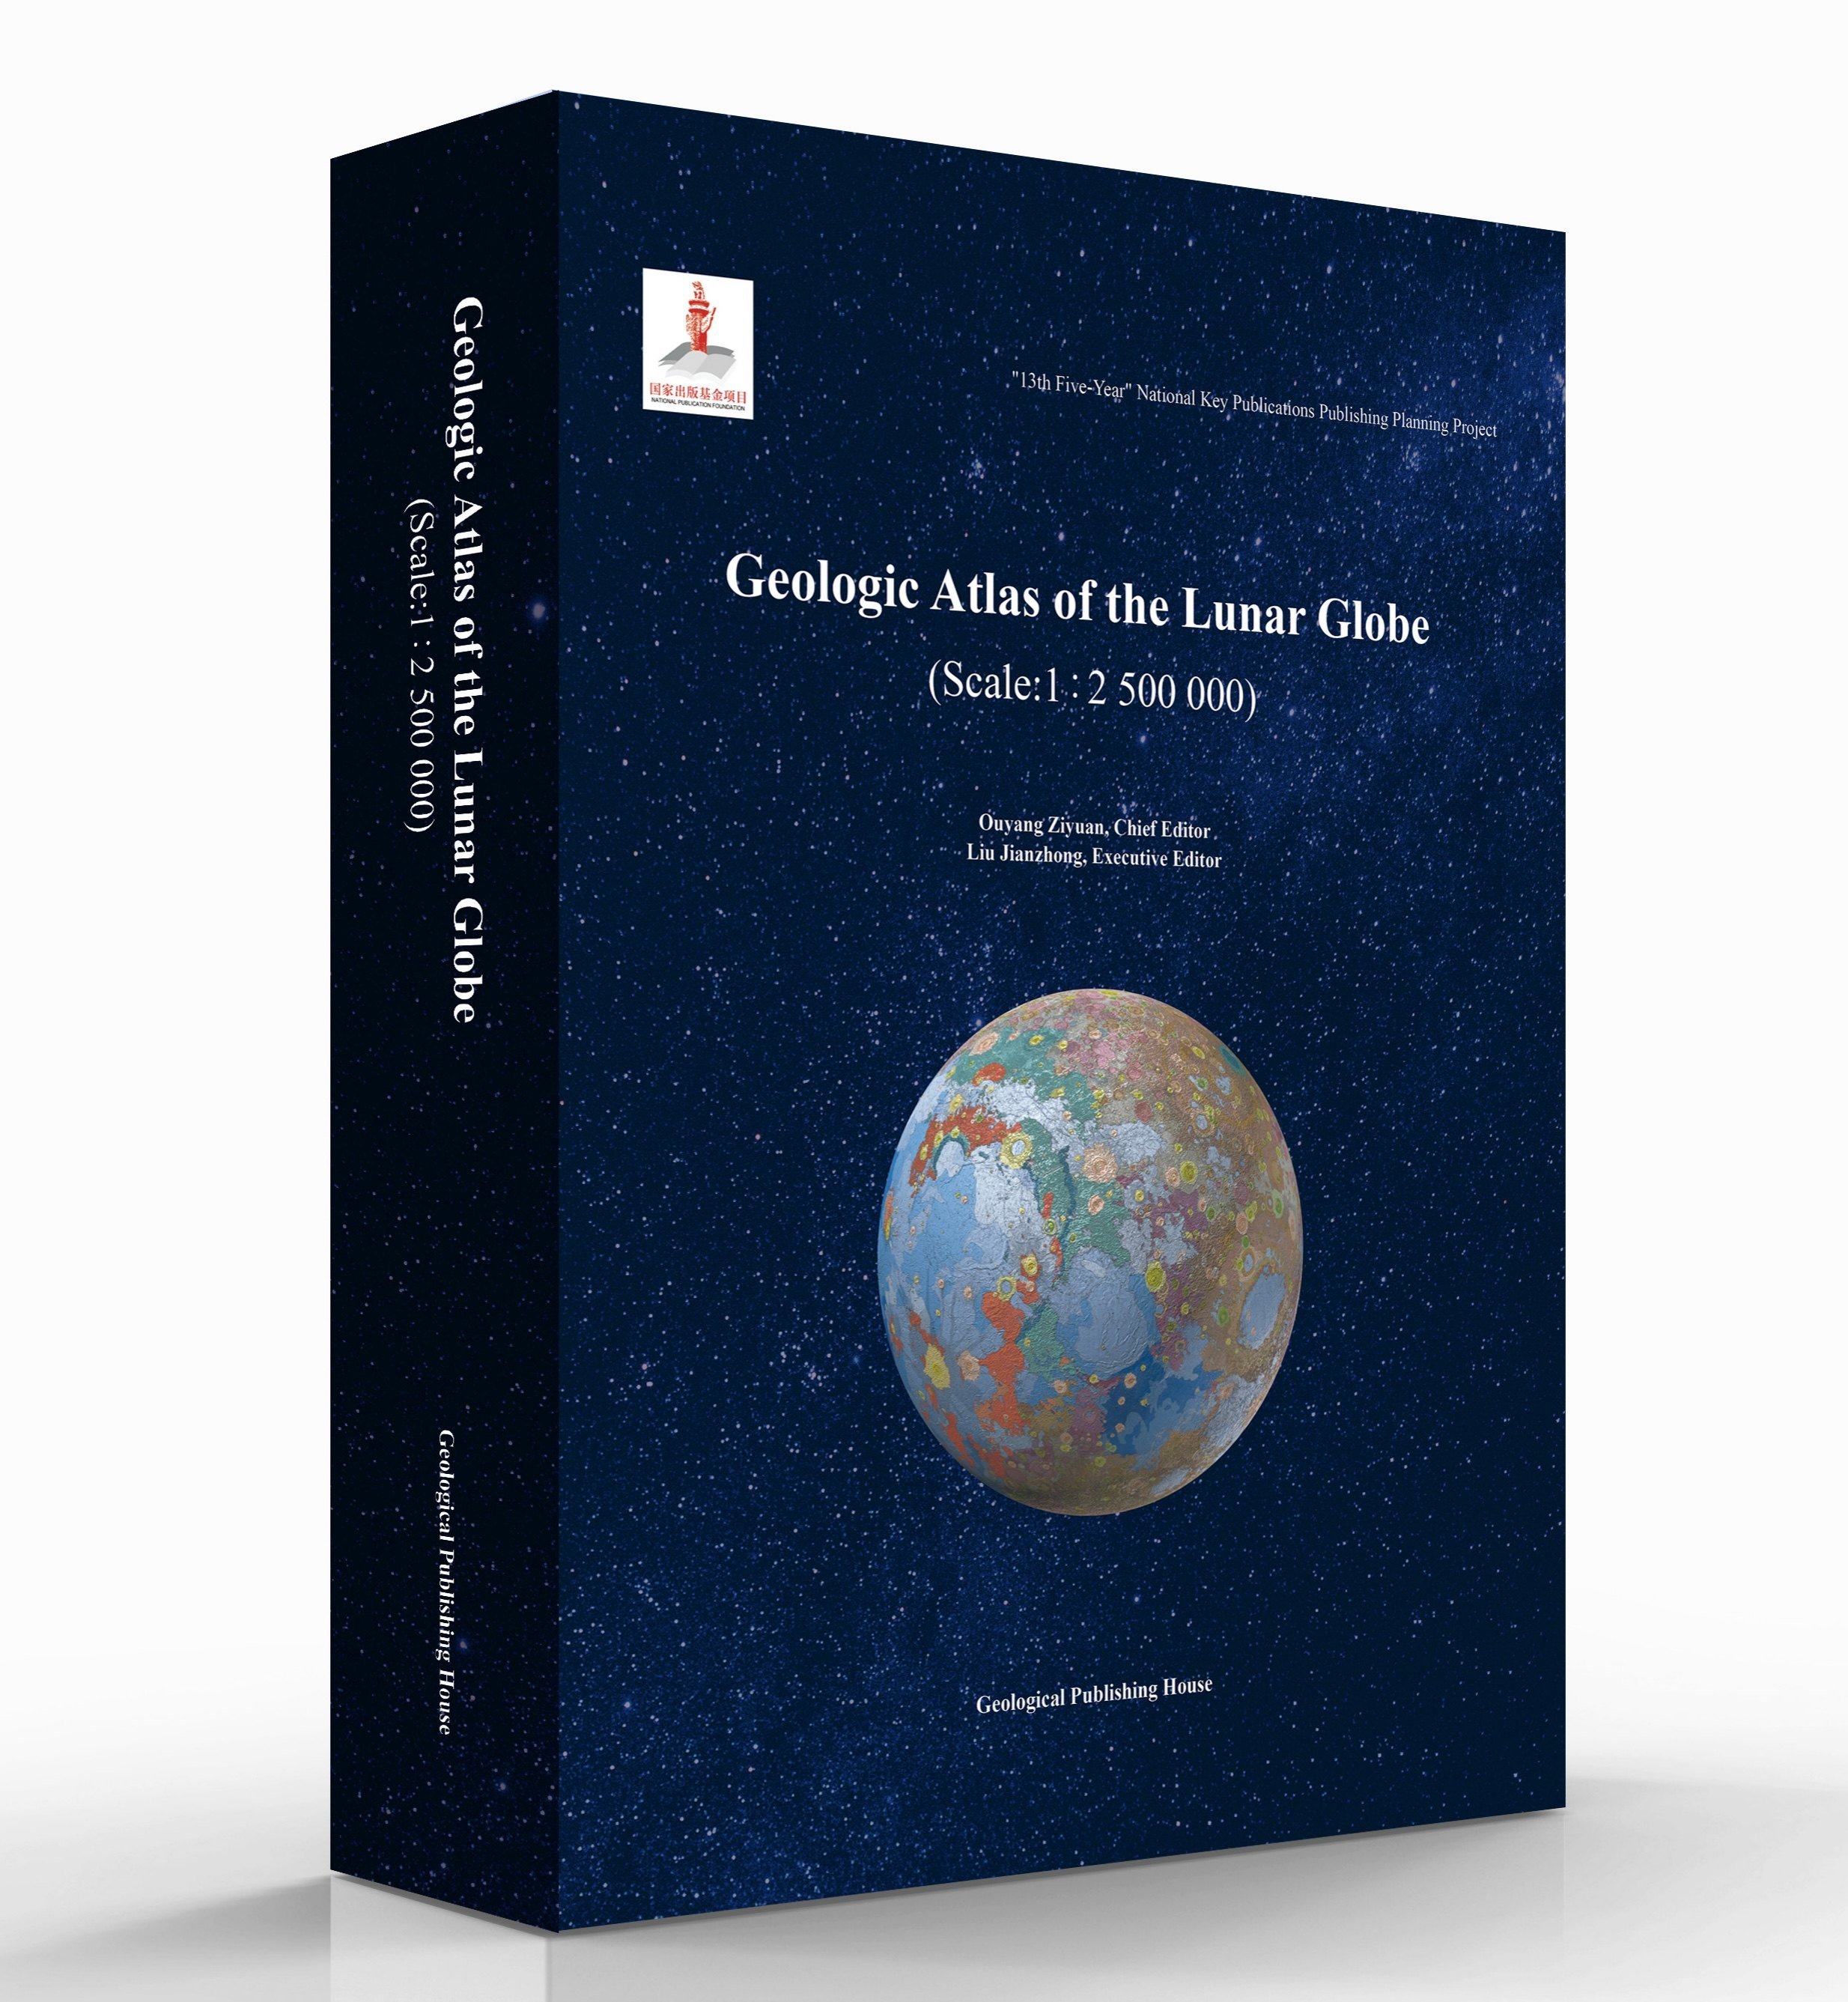 China on Sunday officially released its “Geologic Atlas” of the moon, a 1:2.5 million scale map that is the first complete high-definition lunar geologic atlas in the world. Image: CAS